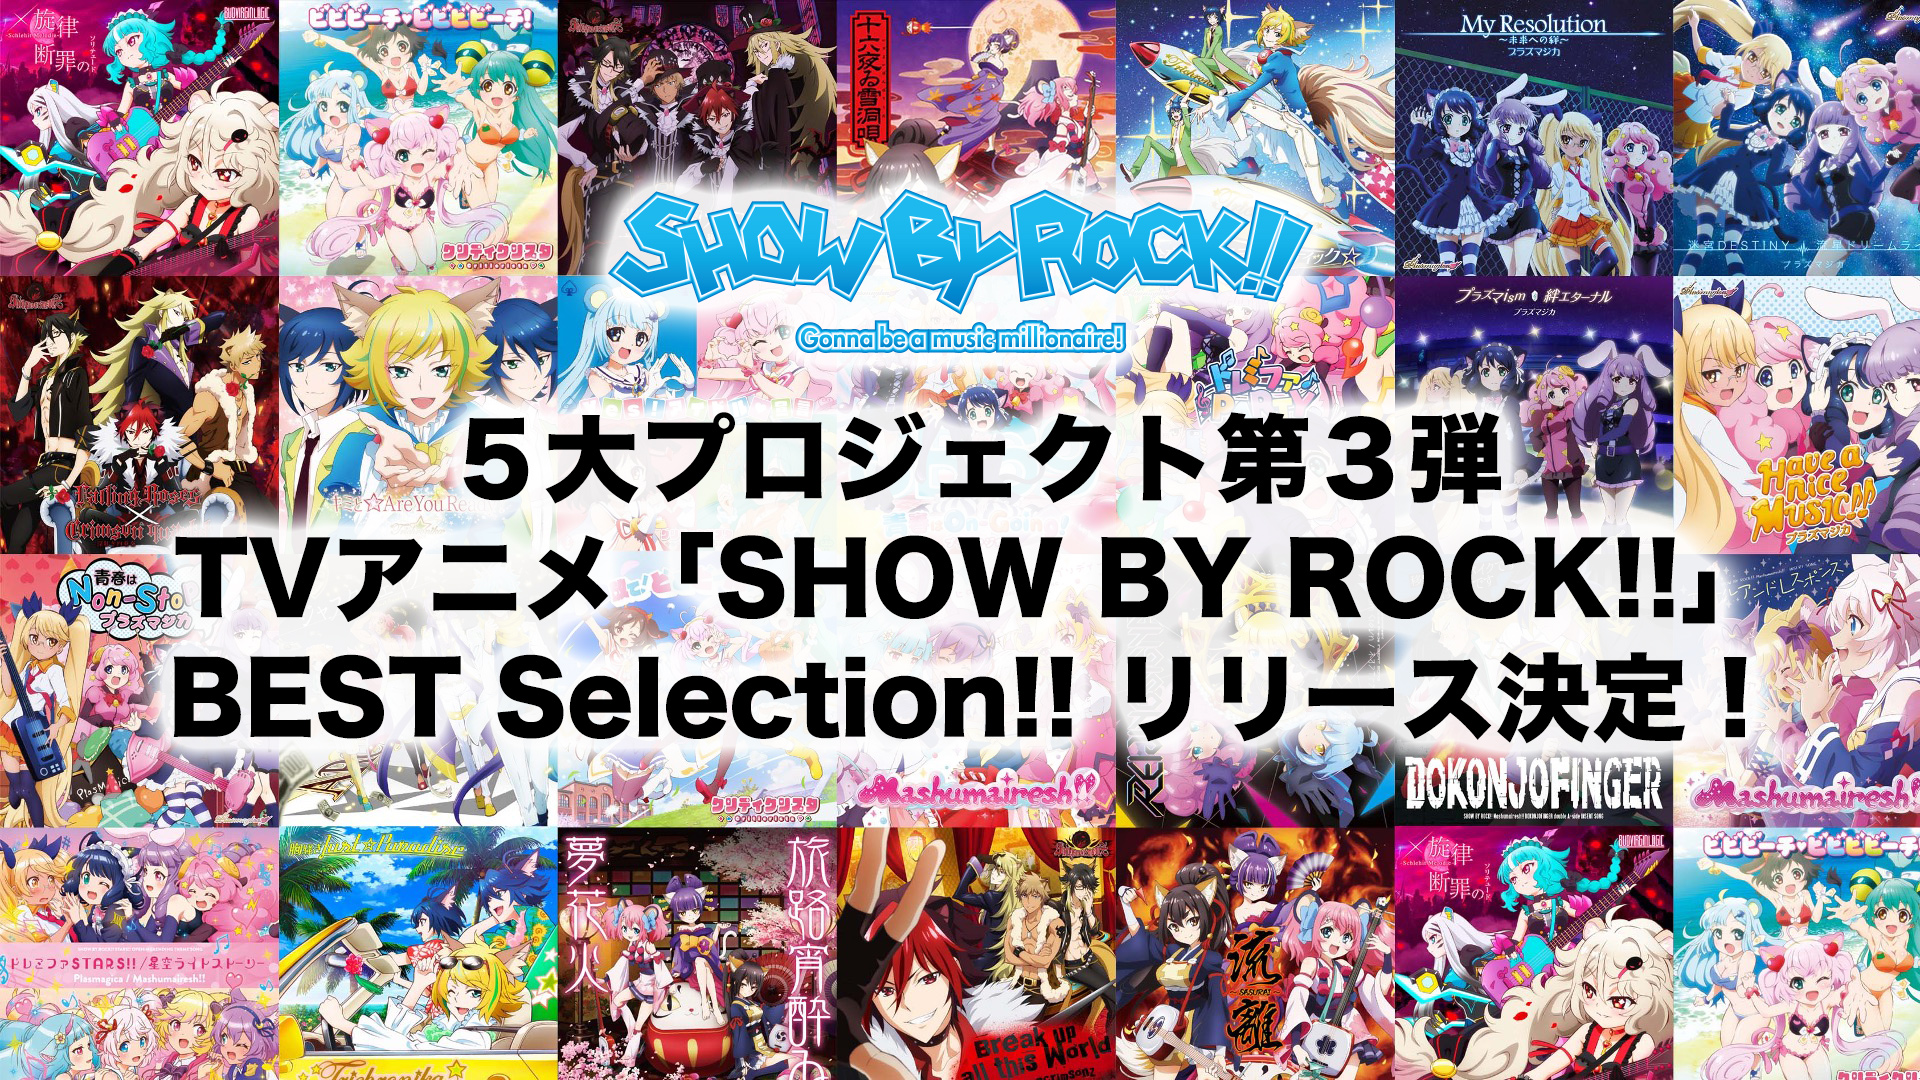 Show By Rock!! Stars!! - The Winter 2021 Preview Guide - Anime News Network